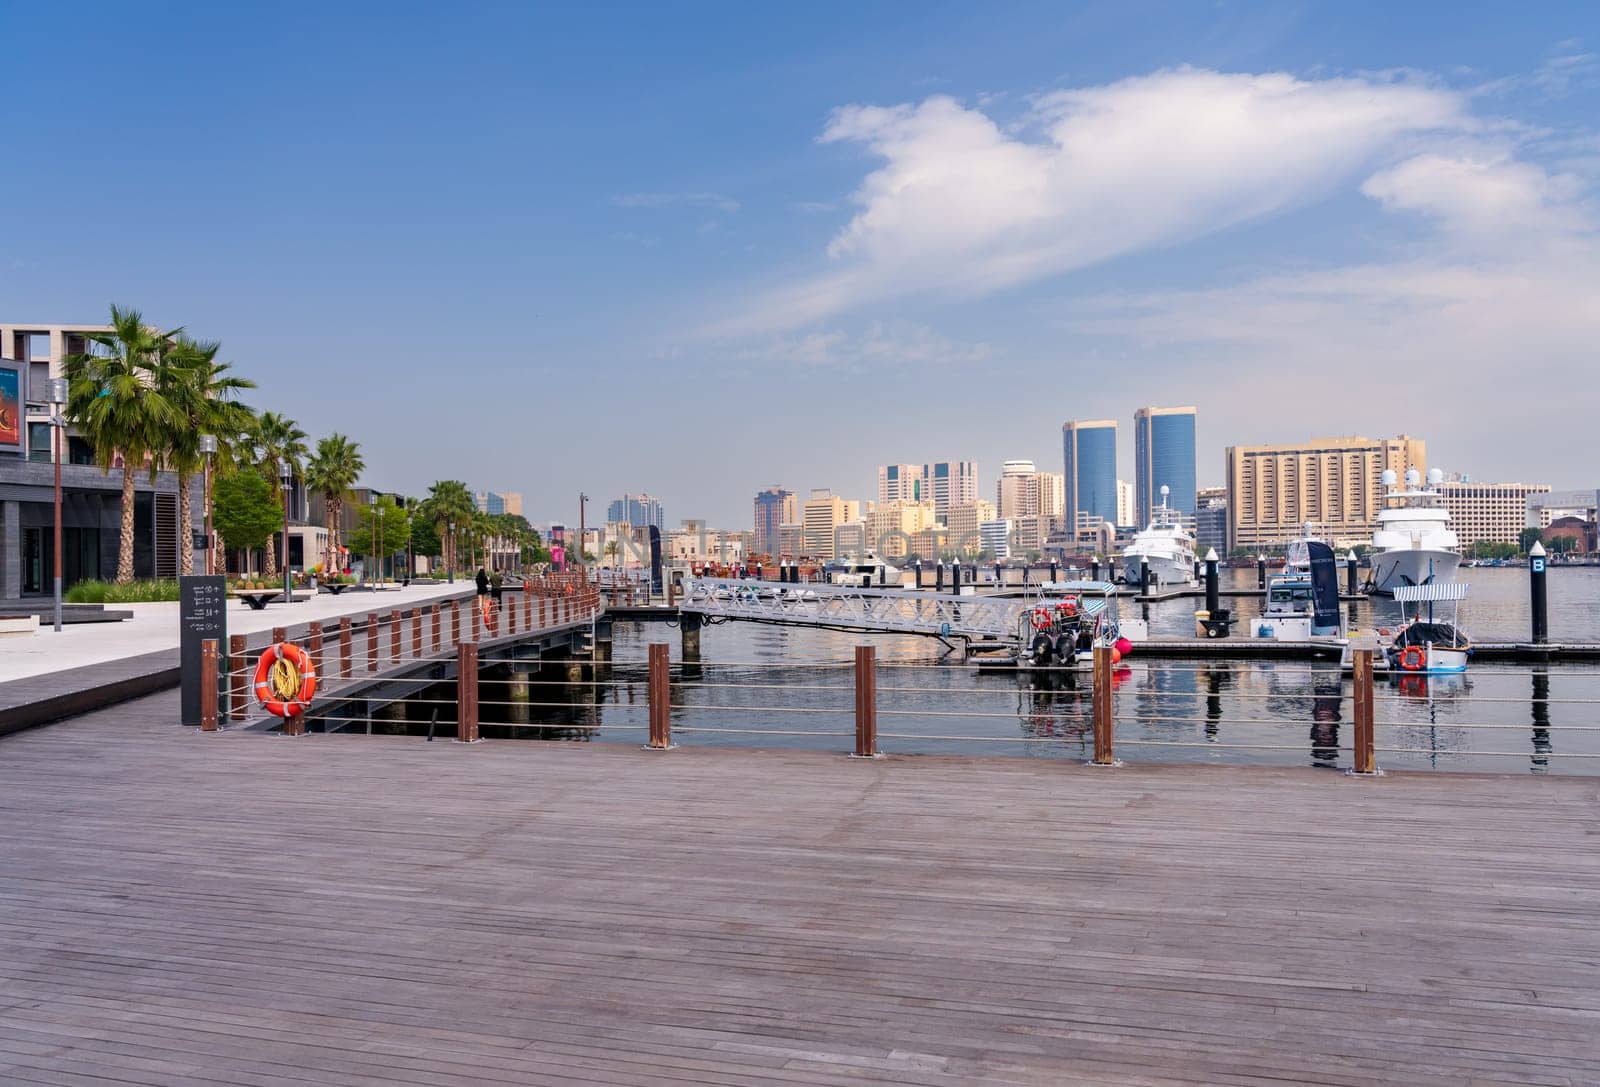 View along the Creek towards Deira with large boats docked by the Al Seef boardwalk in Dubai, UAE